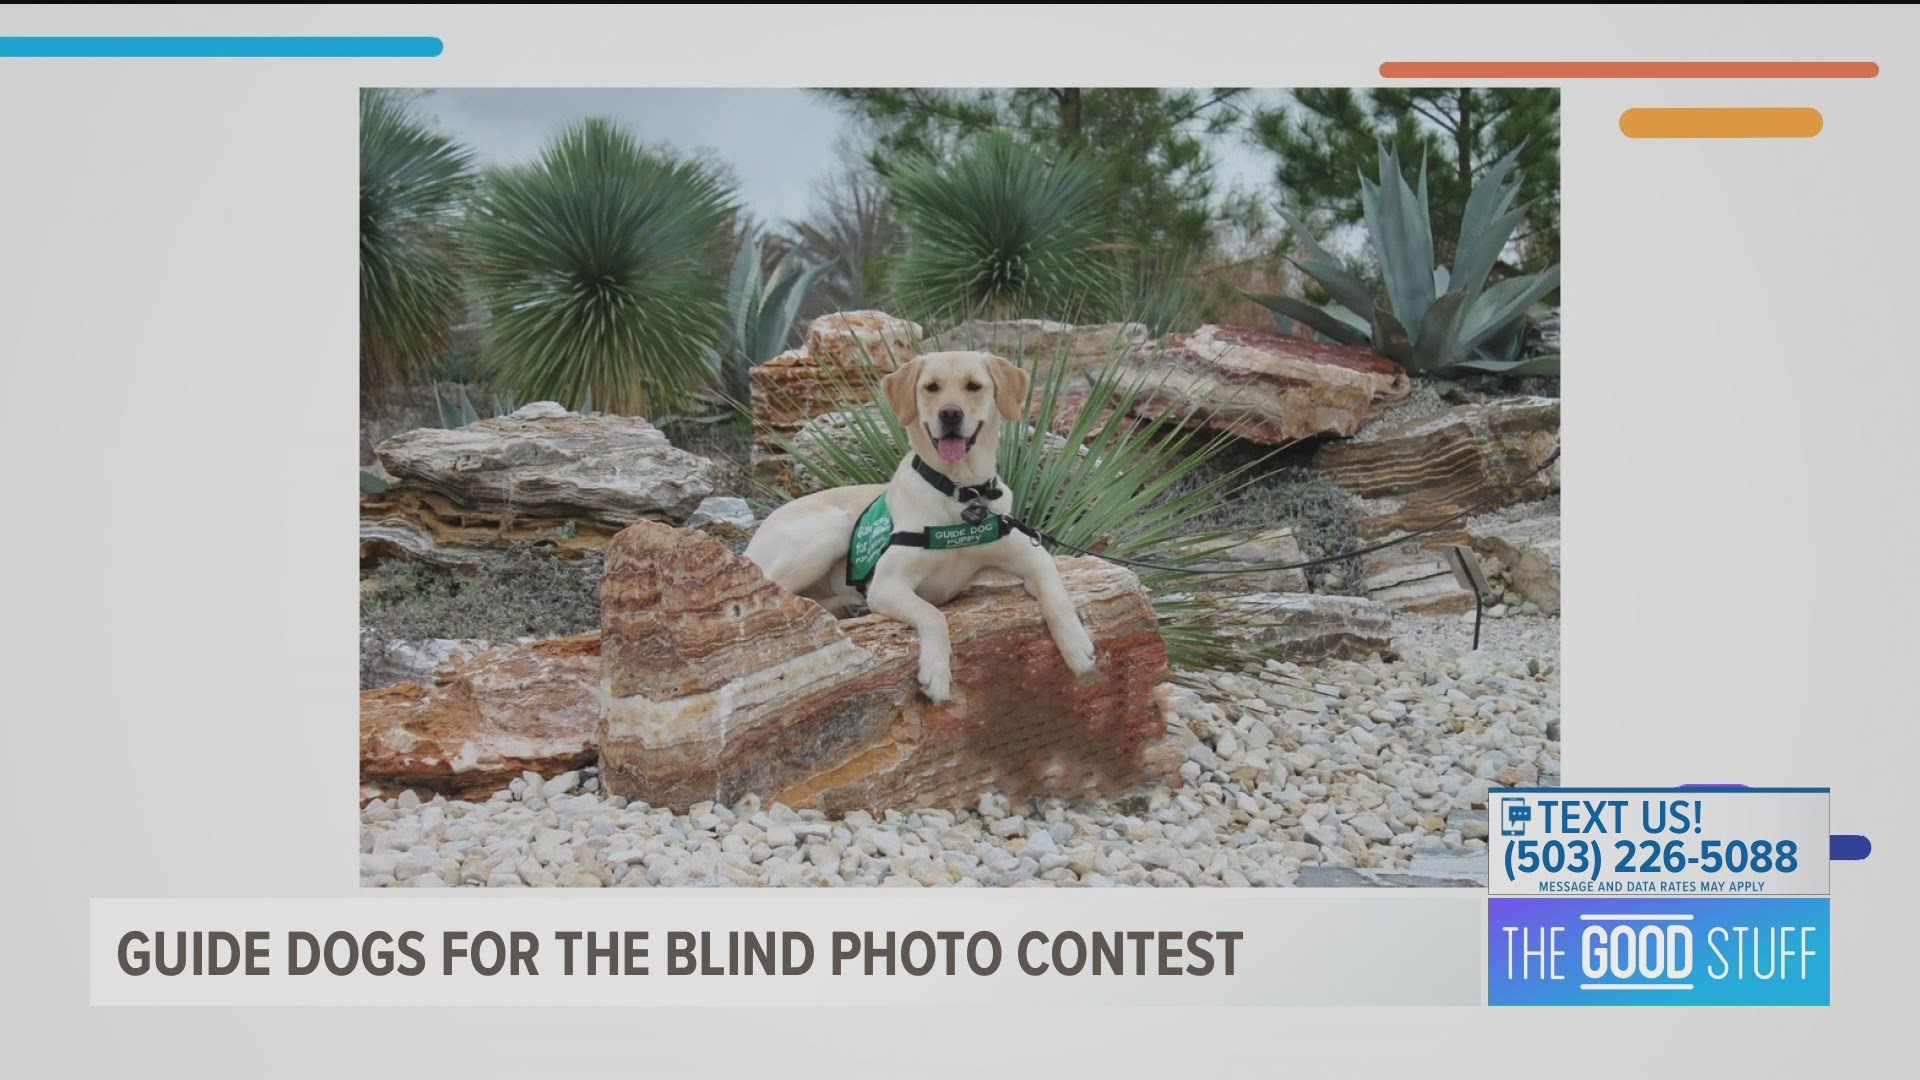 Guide Dogs for the Blind is holding its Puparazzi Photo Contest through April 19.